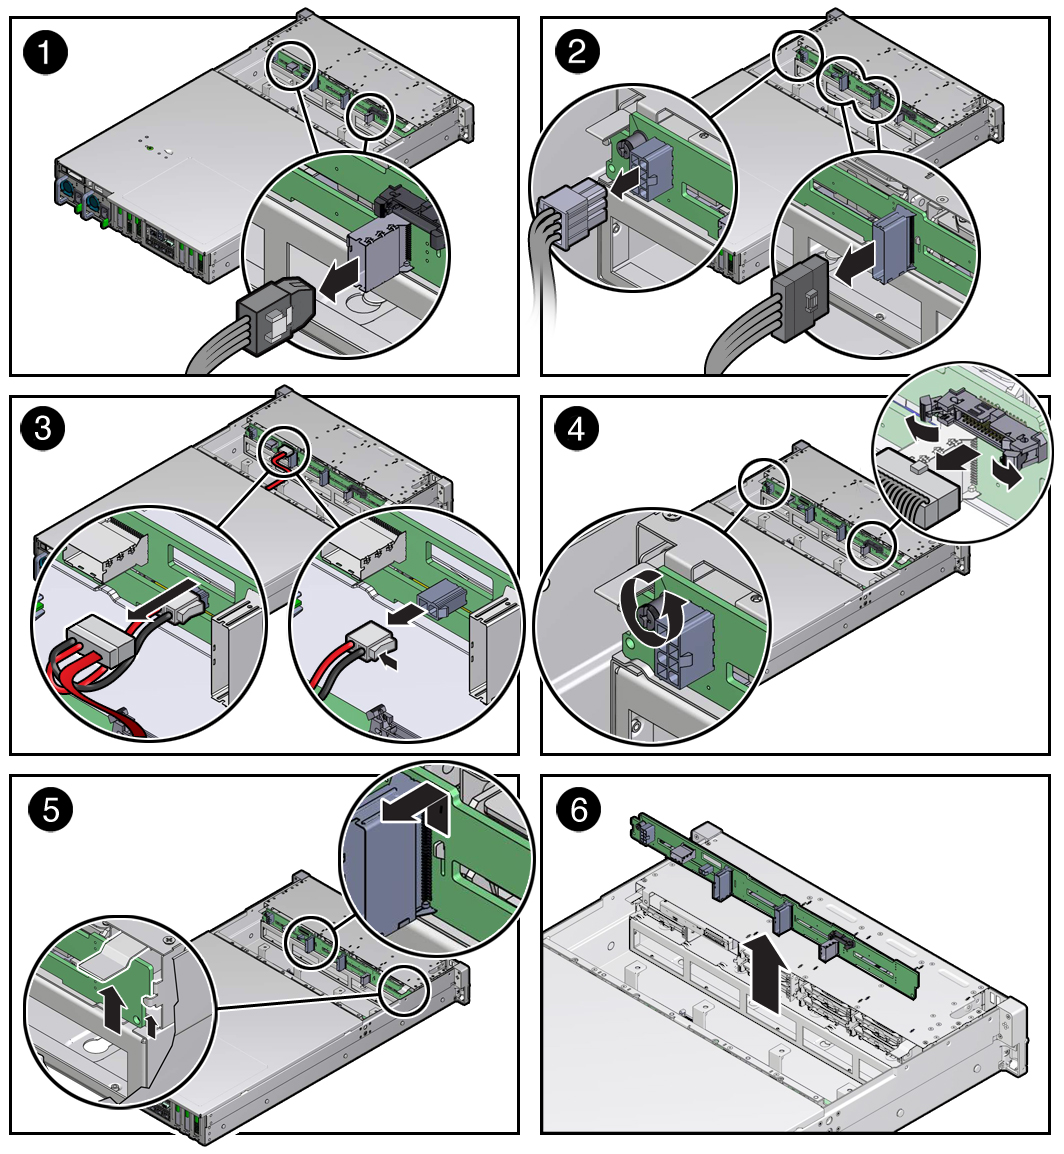 image:Figure showing how to remove the drive backplane.